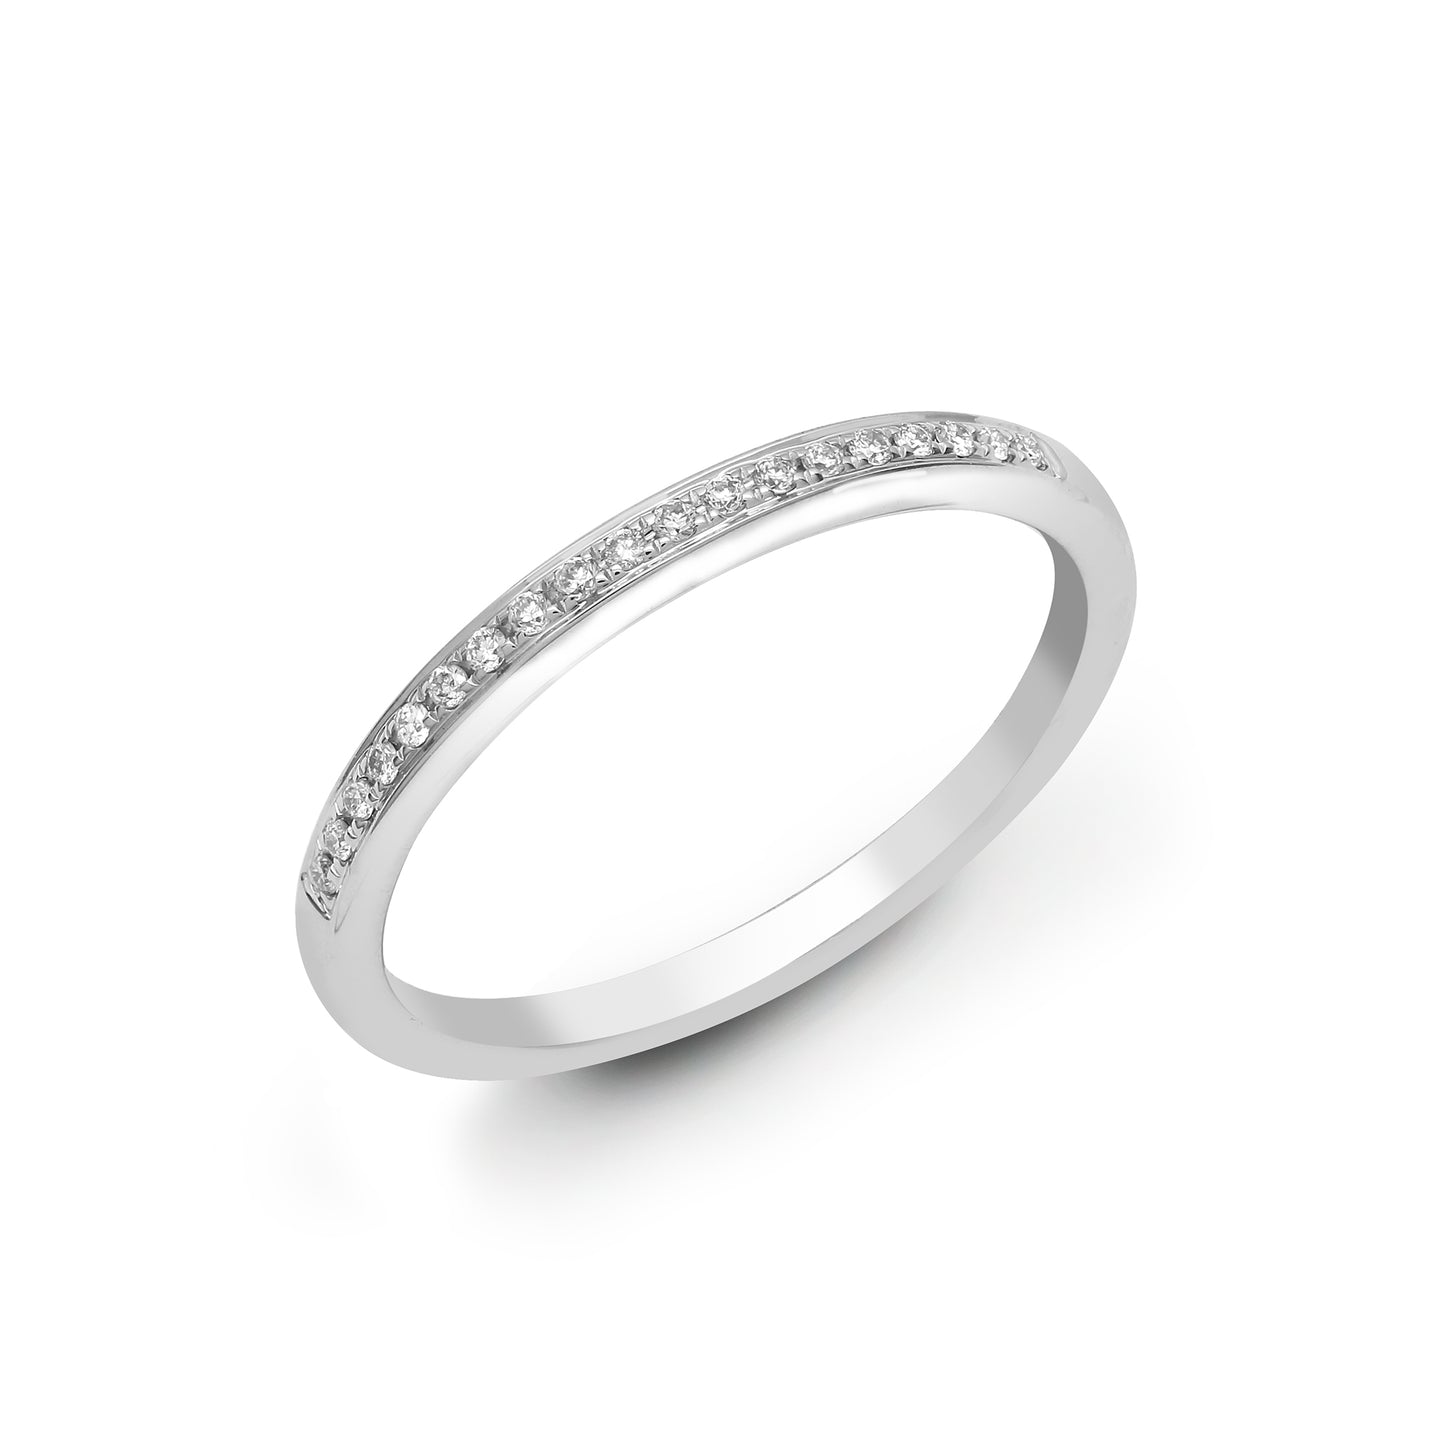 18ct White Gold  0.5ct Diamond Dainty Band Eternity Ring 3mm - 18R532-050